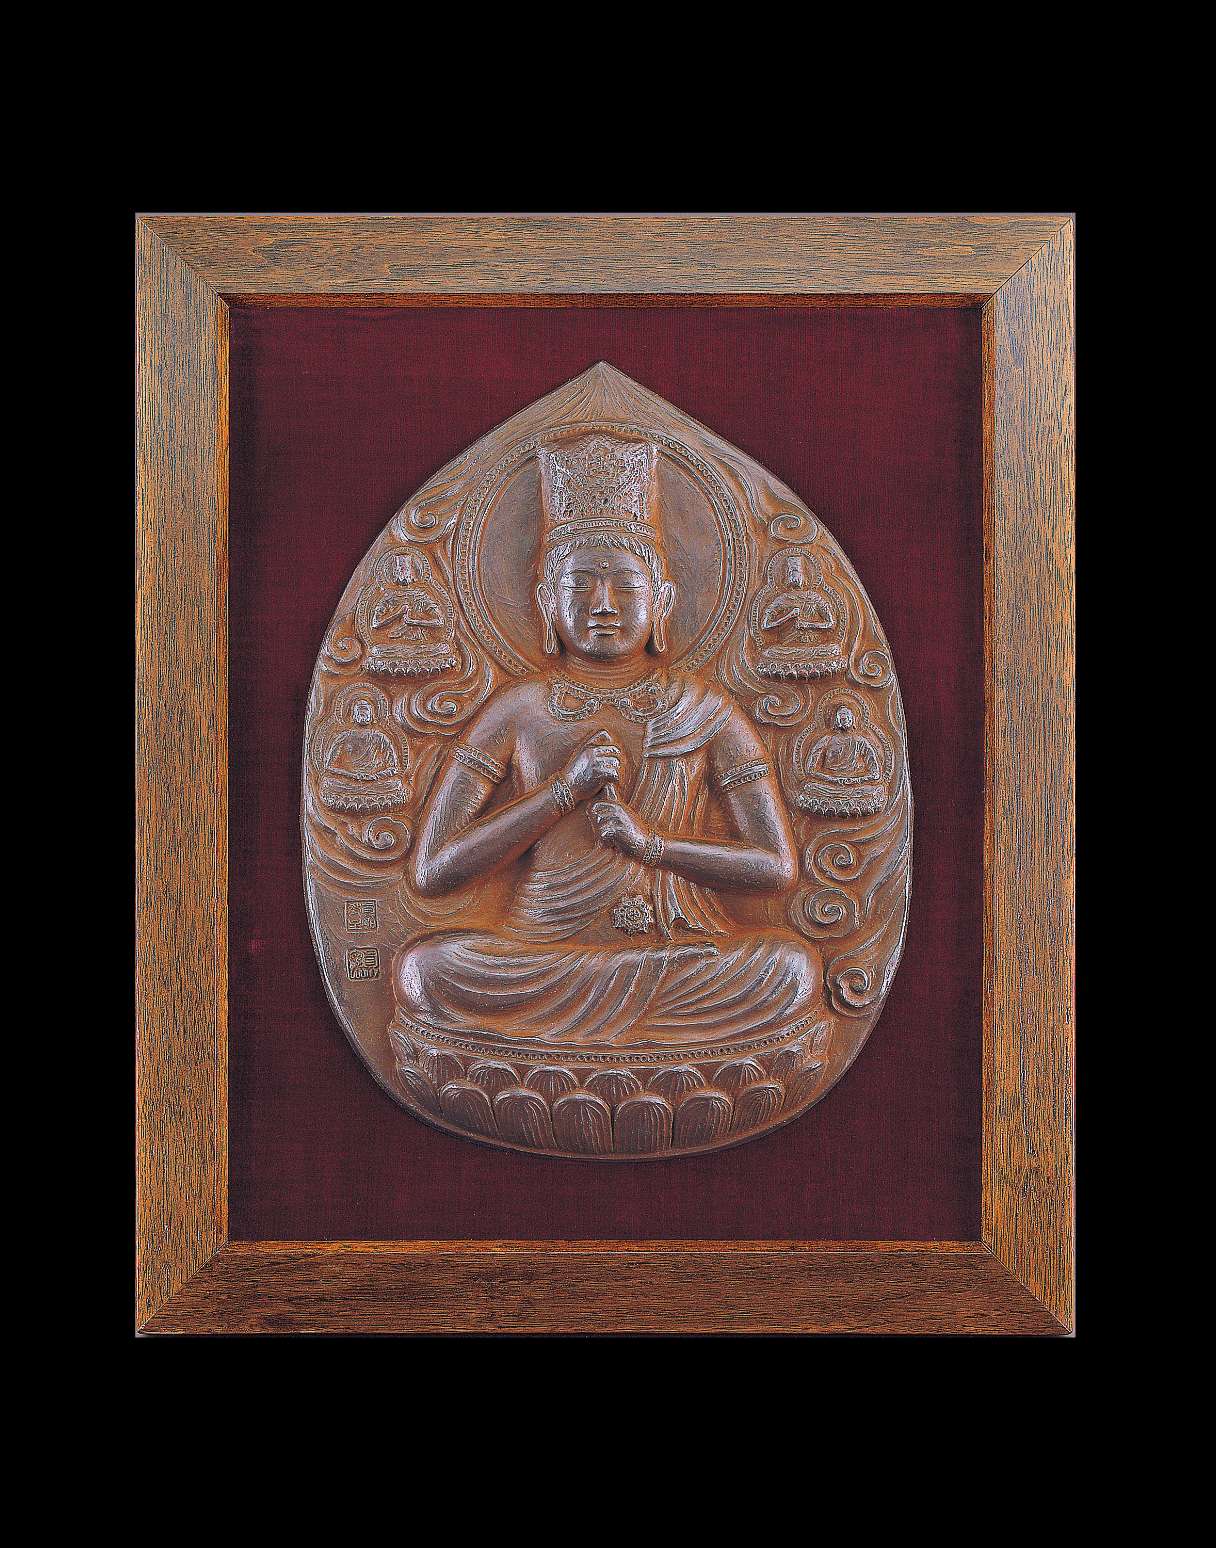 A tear-shaped metallic relief of a buddha wearing a tall crown sitting cross-legged, grasping his upturned left index finger with his right hand, surrounded by clouds and four smaller buddhas.